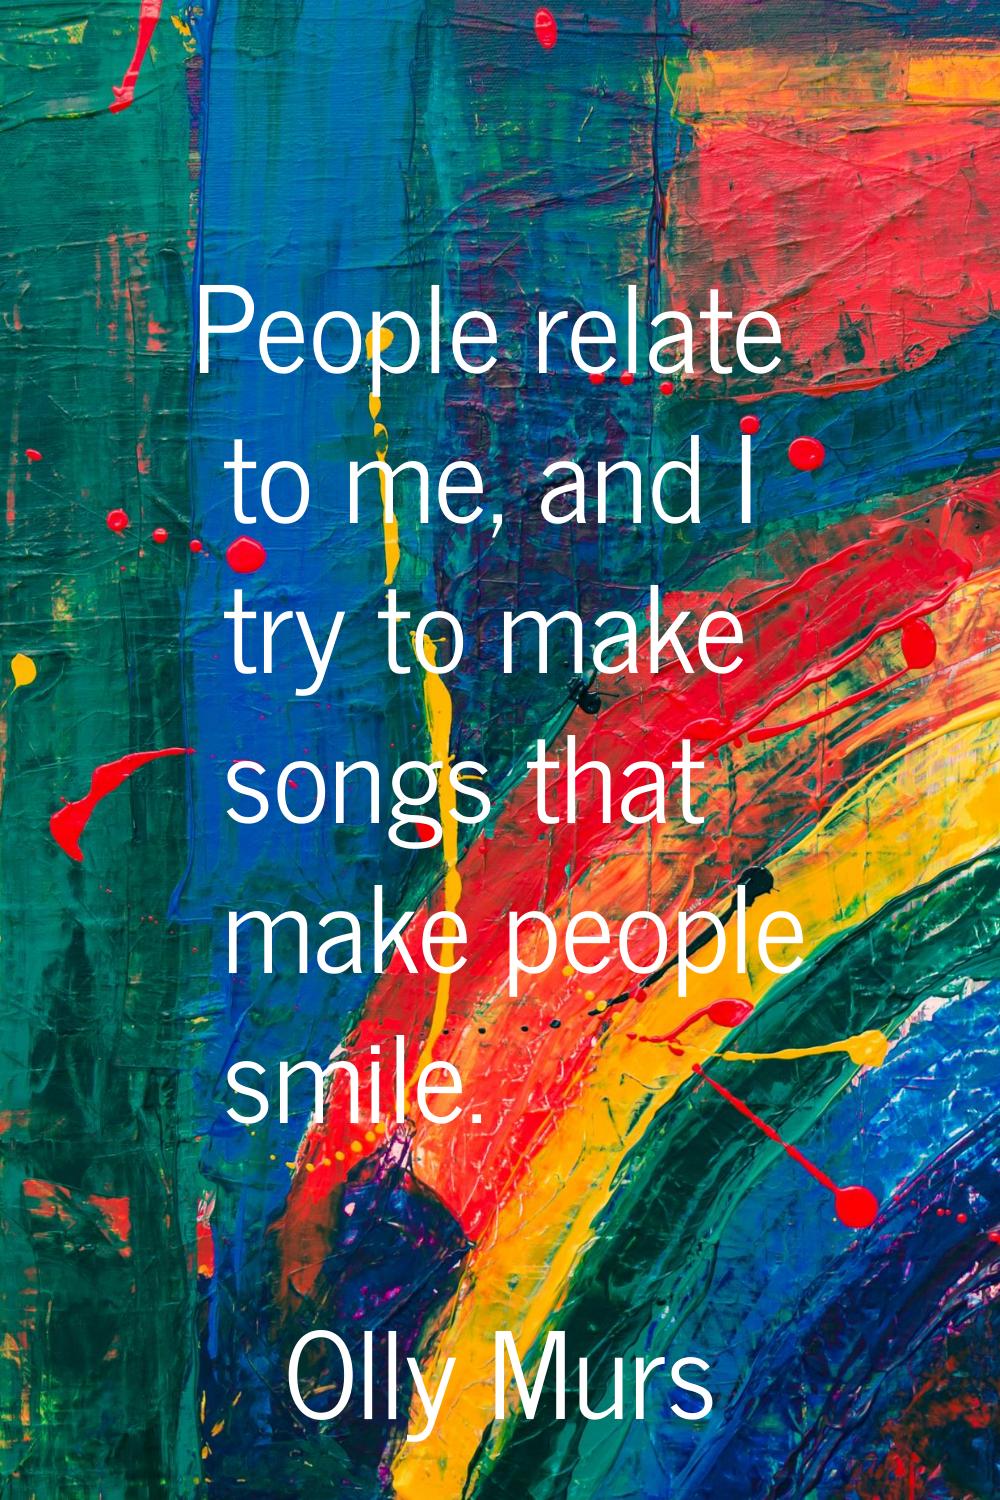 People relate to me, and I try to make songs that make people smile.